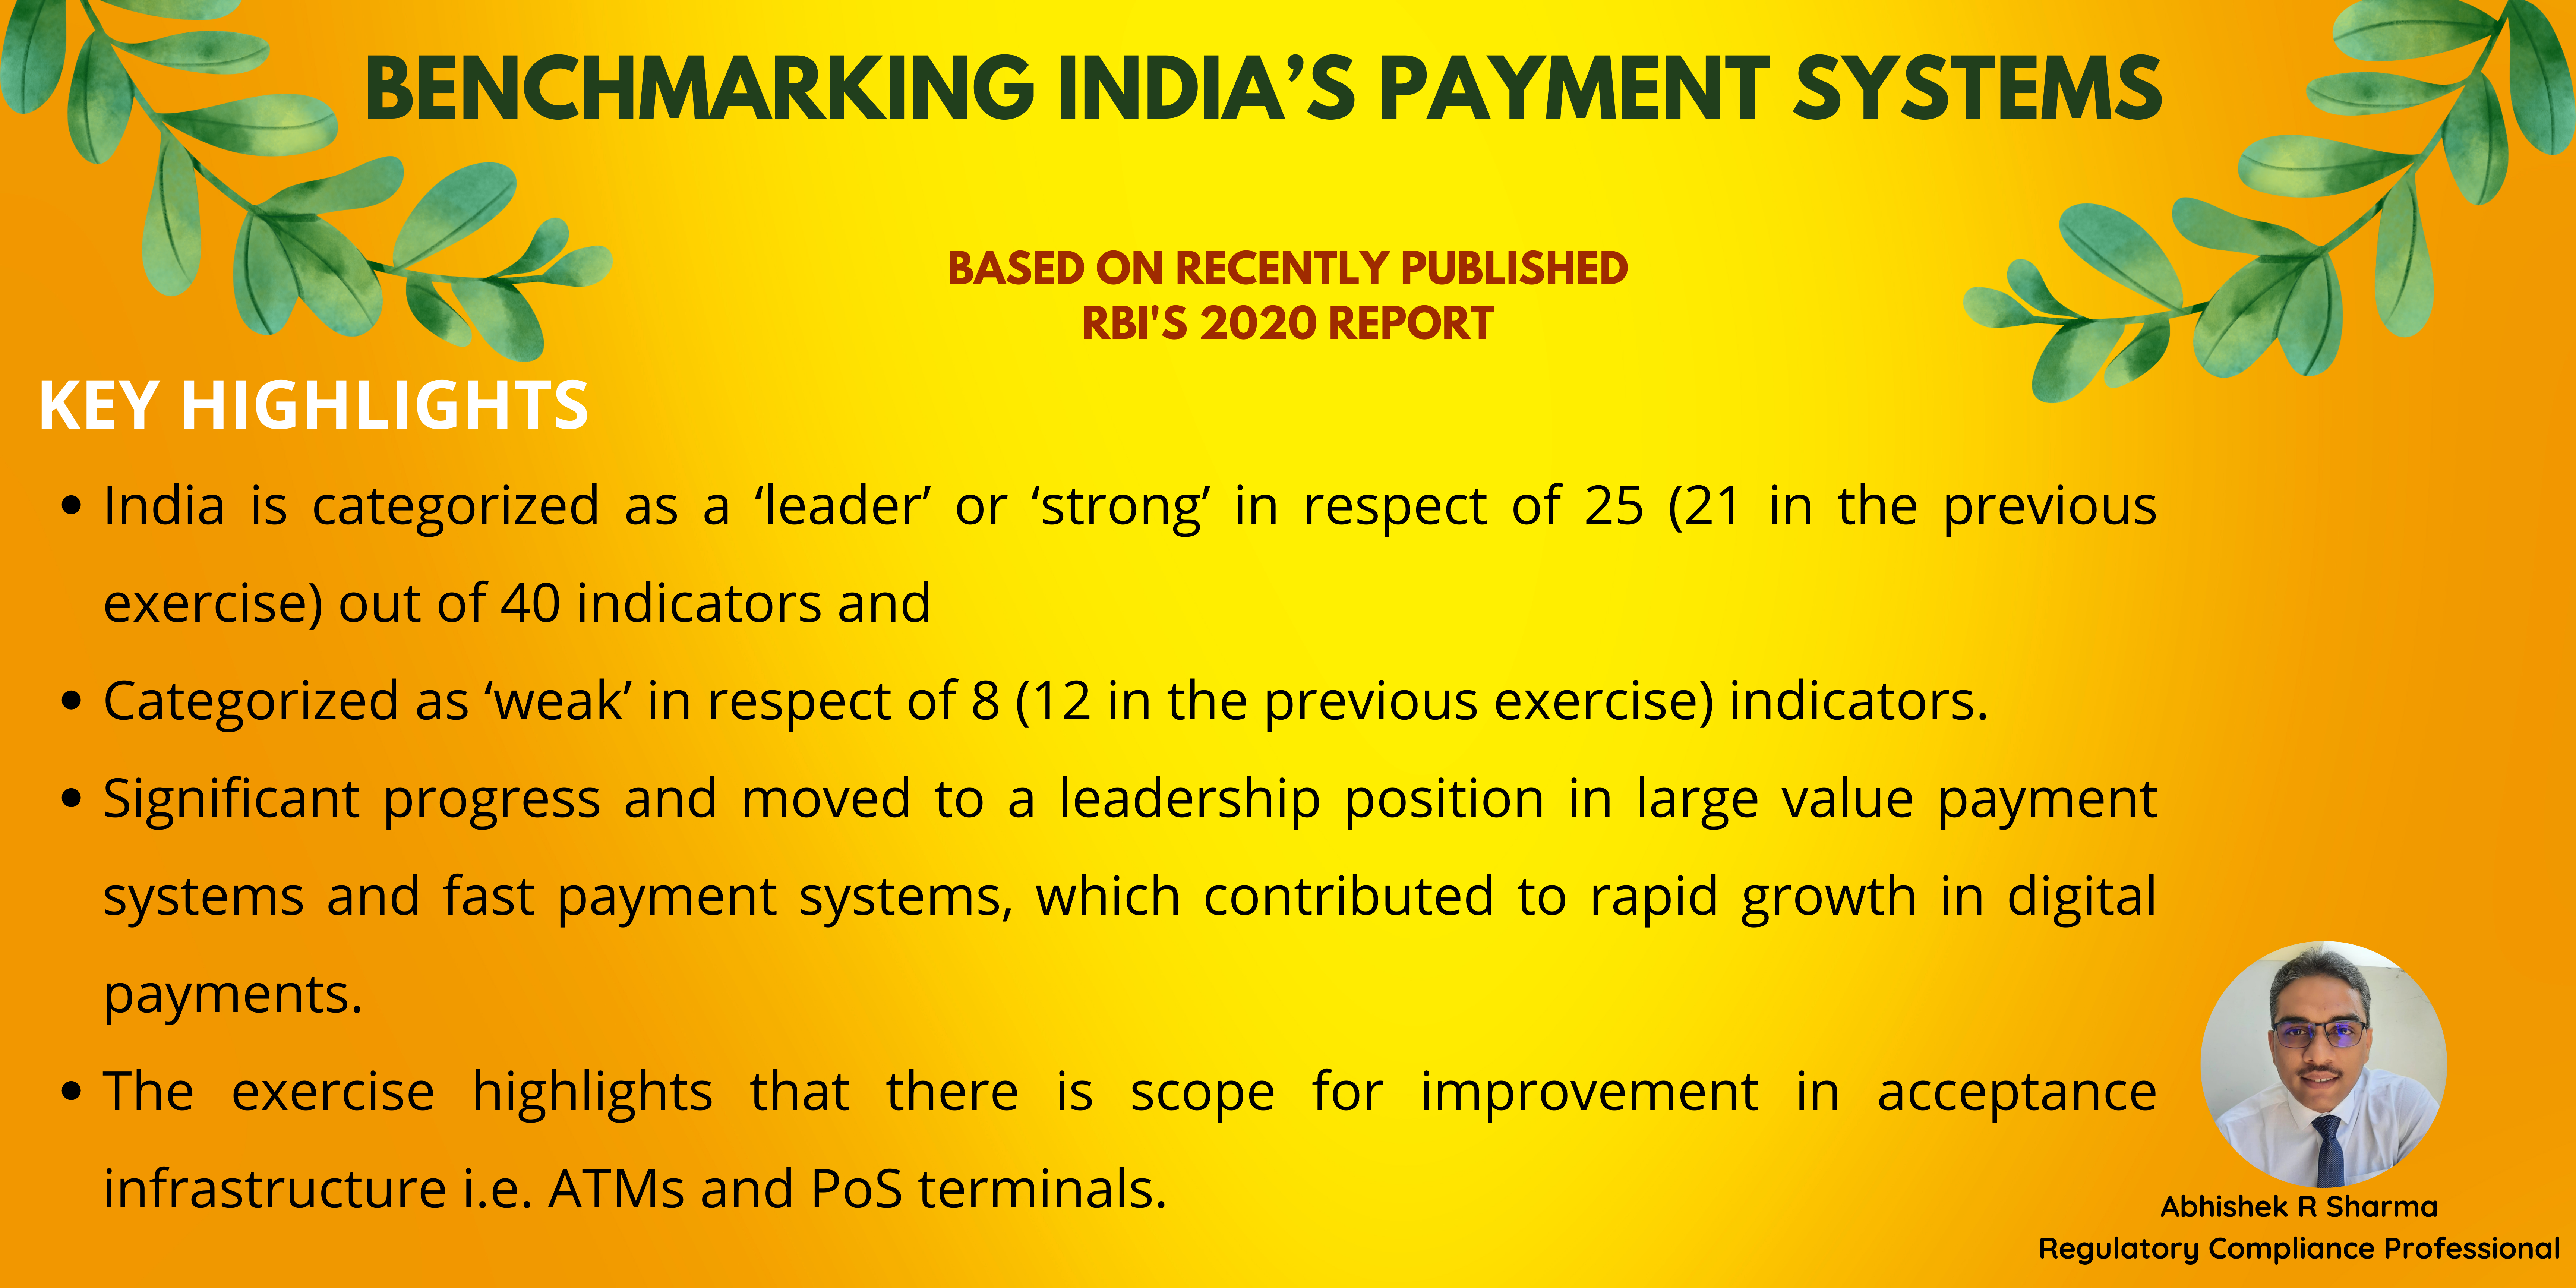 Benchmarking India’s Payment Systems